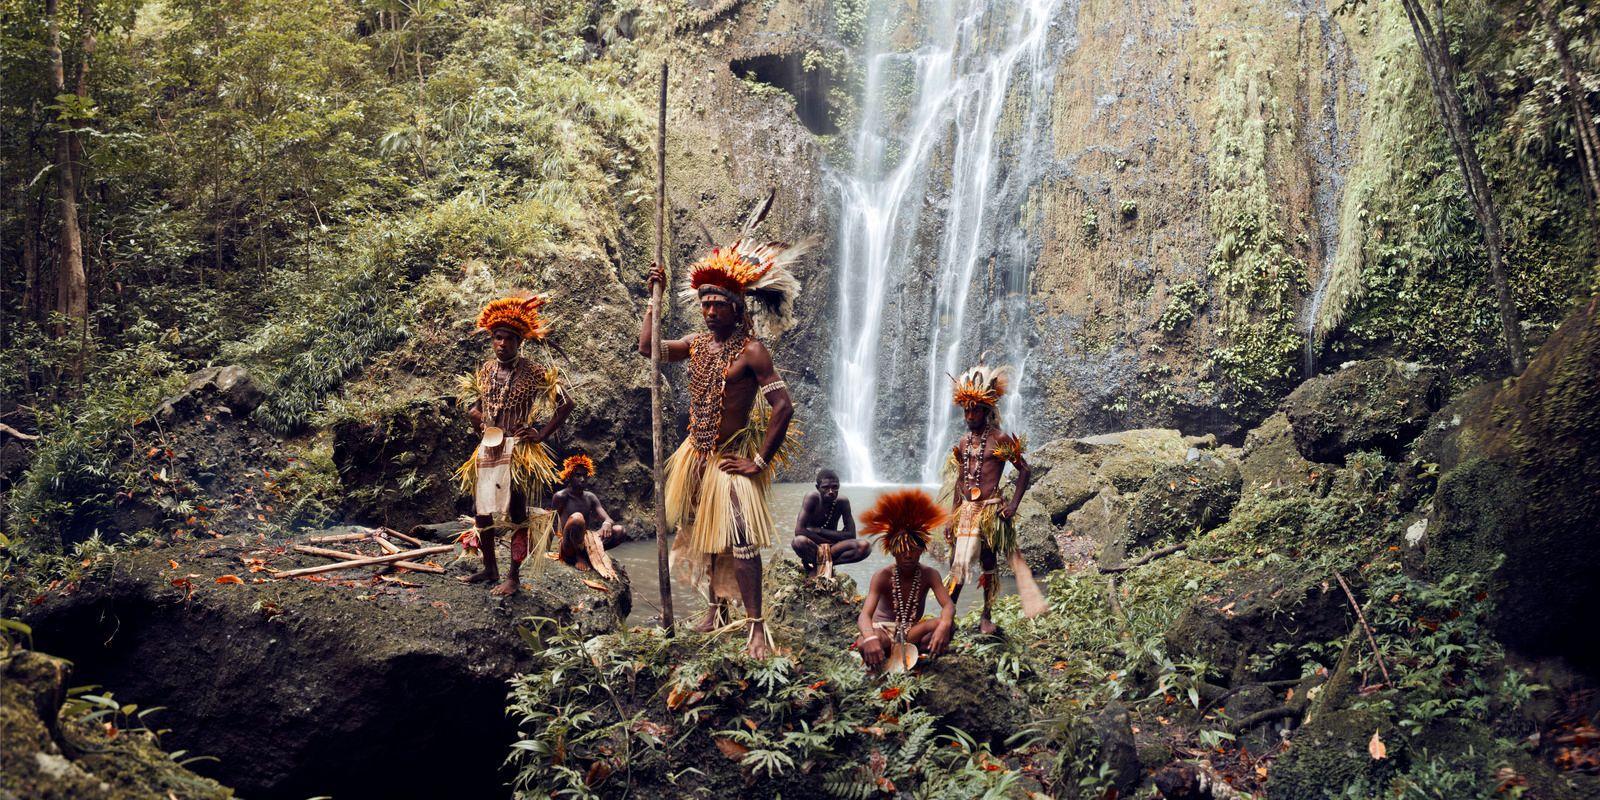 XXXIII 6, Tufi Waterfall, Papua, New Guinea 2017

The Korafe community lives close to the town of Tufi in the north-east of Papua New Guinea’s main island. Tufi is close to Cape Nelson, a coastal area consisting of tropical ‘fjords’. 

The